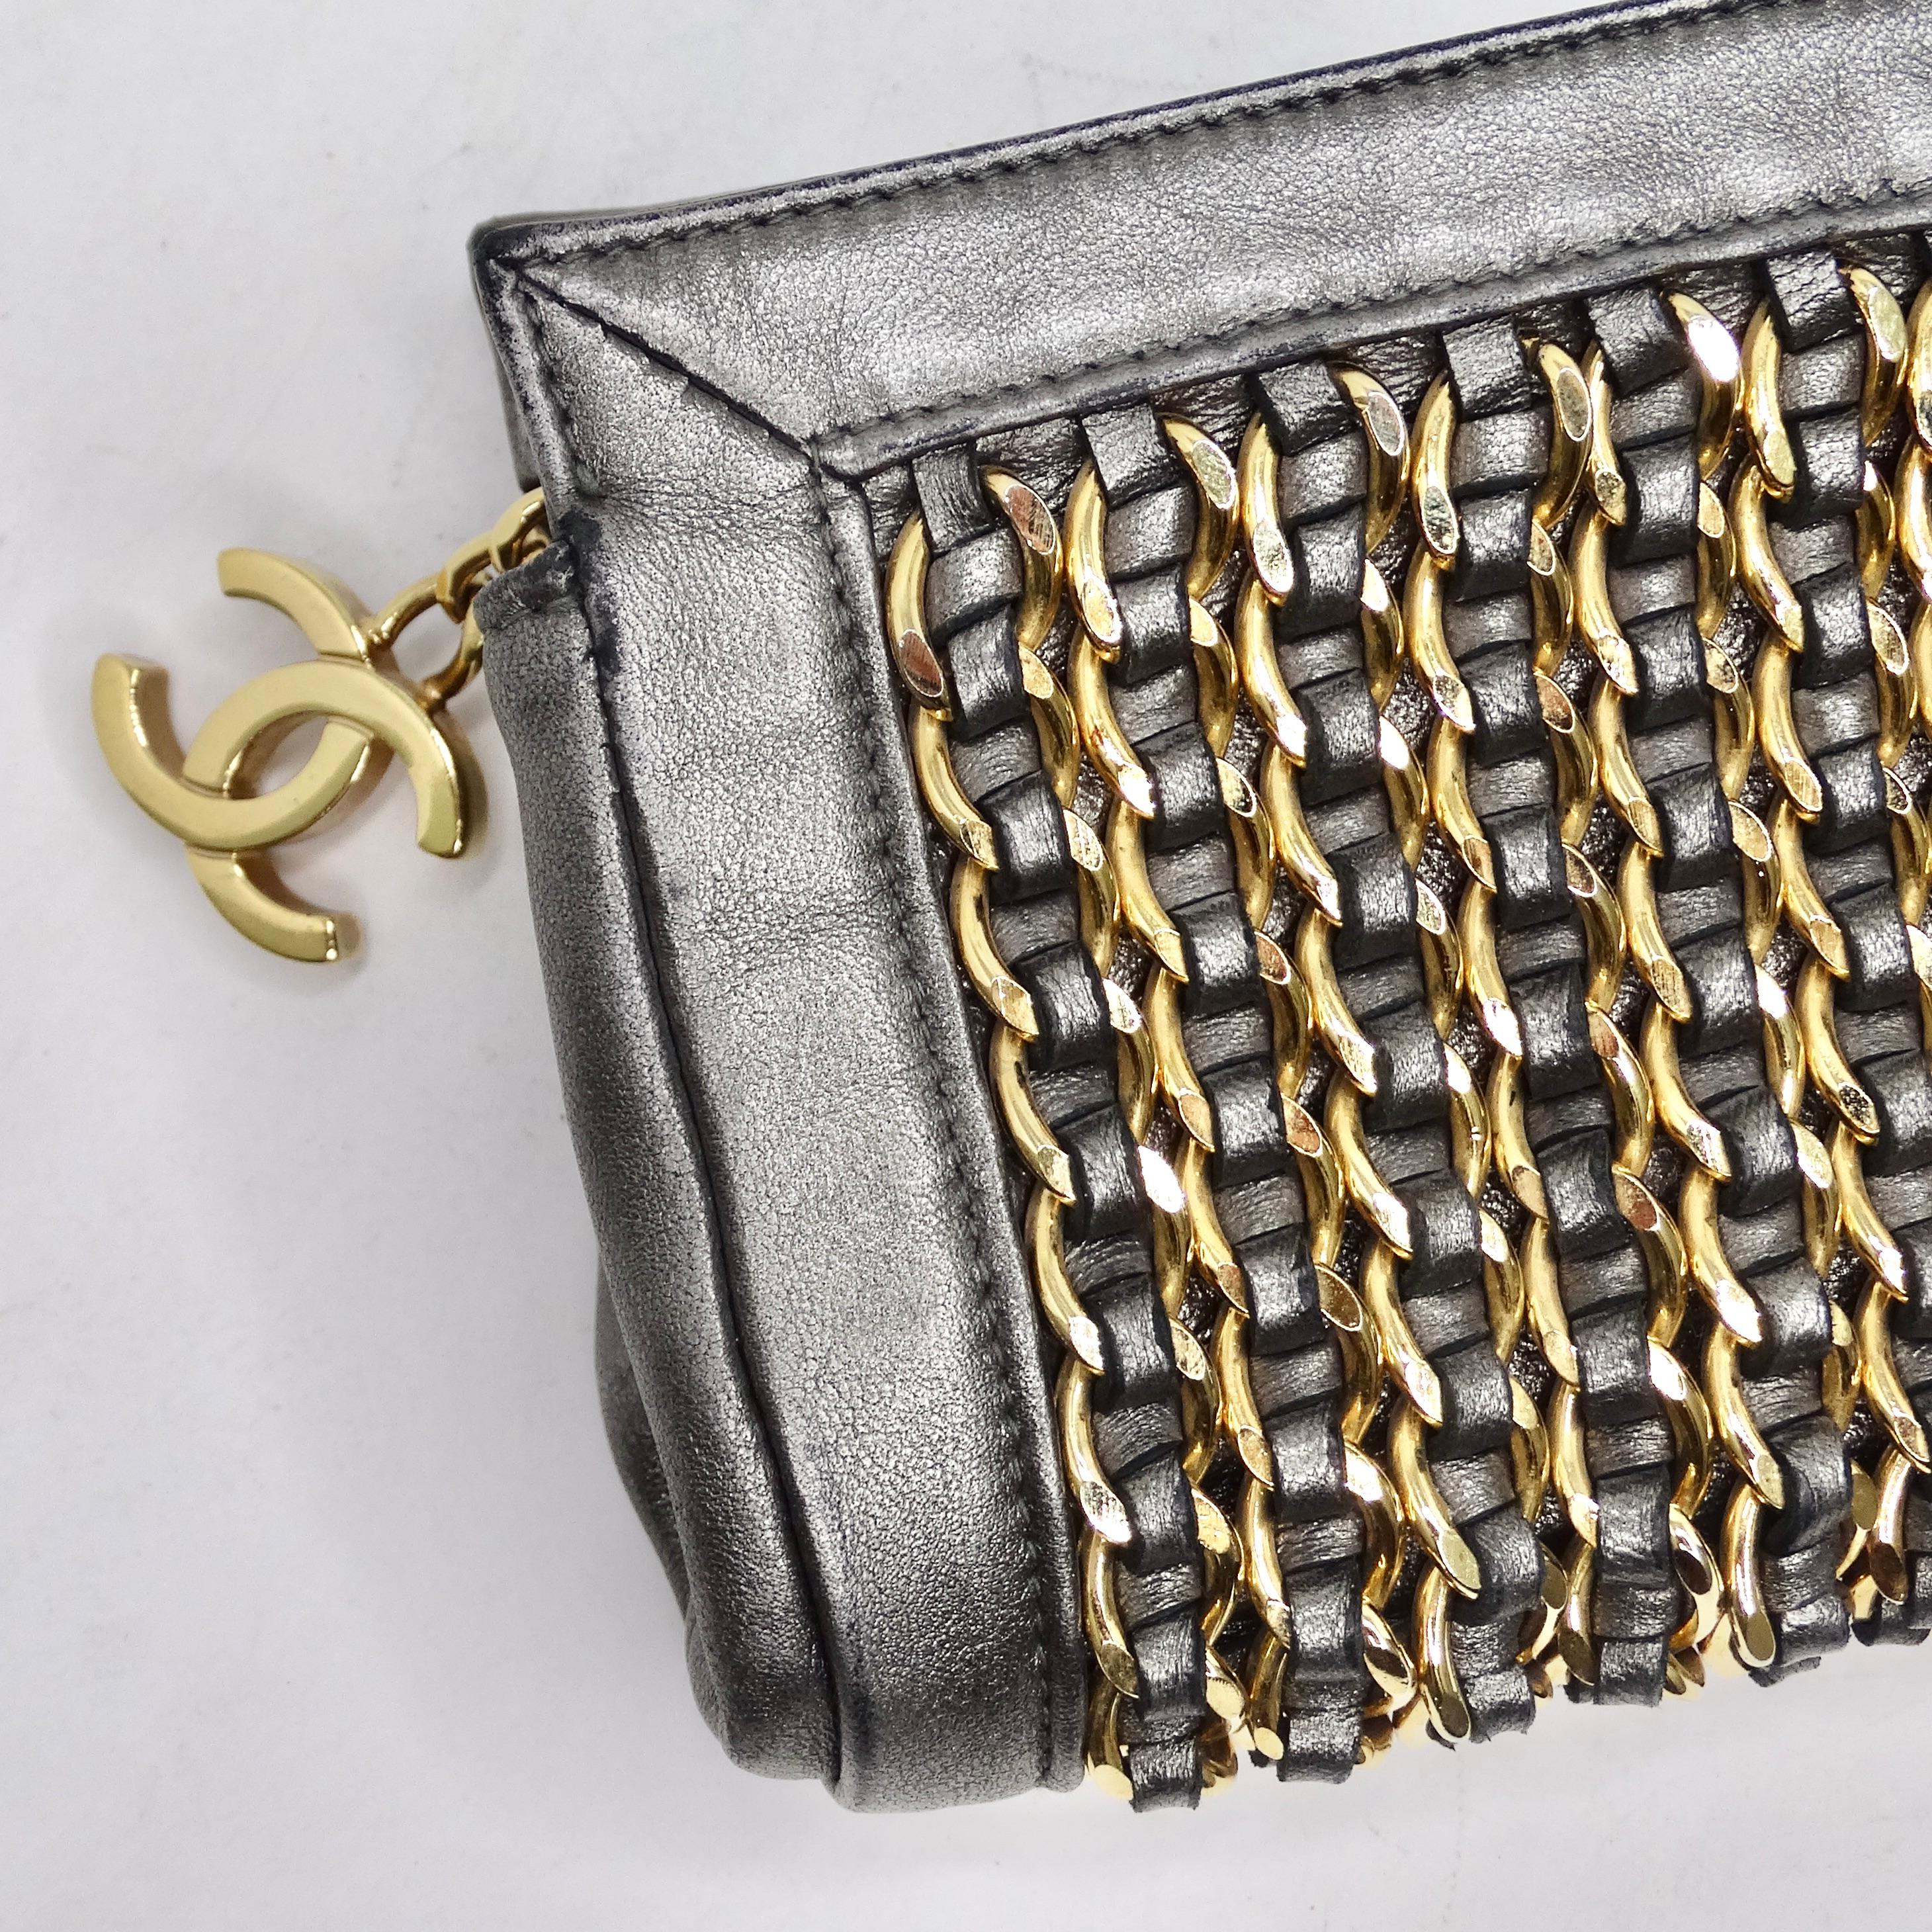 Introducing the Chanel Lambskin Chain Embellished Clutch, a dazzling and versatile accessory that seamlessly combines glamour with practicality. This metallic silver lambskin leather clutch is a true reflection of Chanel's iconic design, featuring